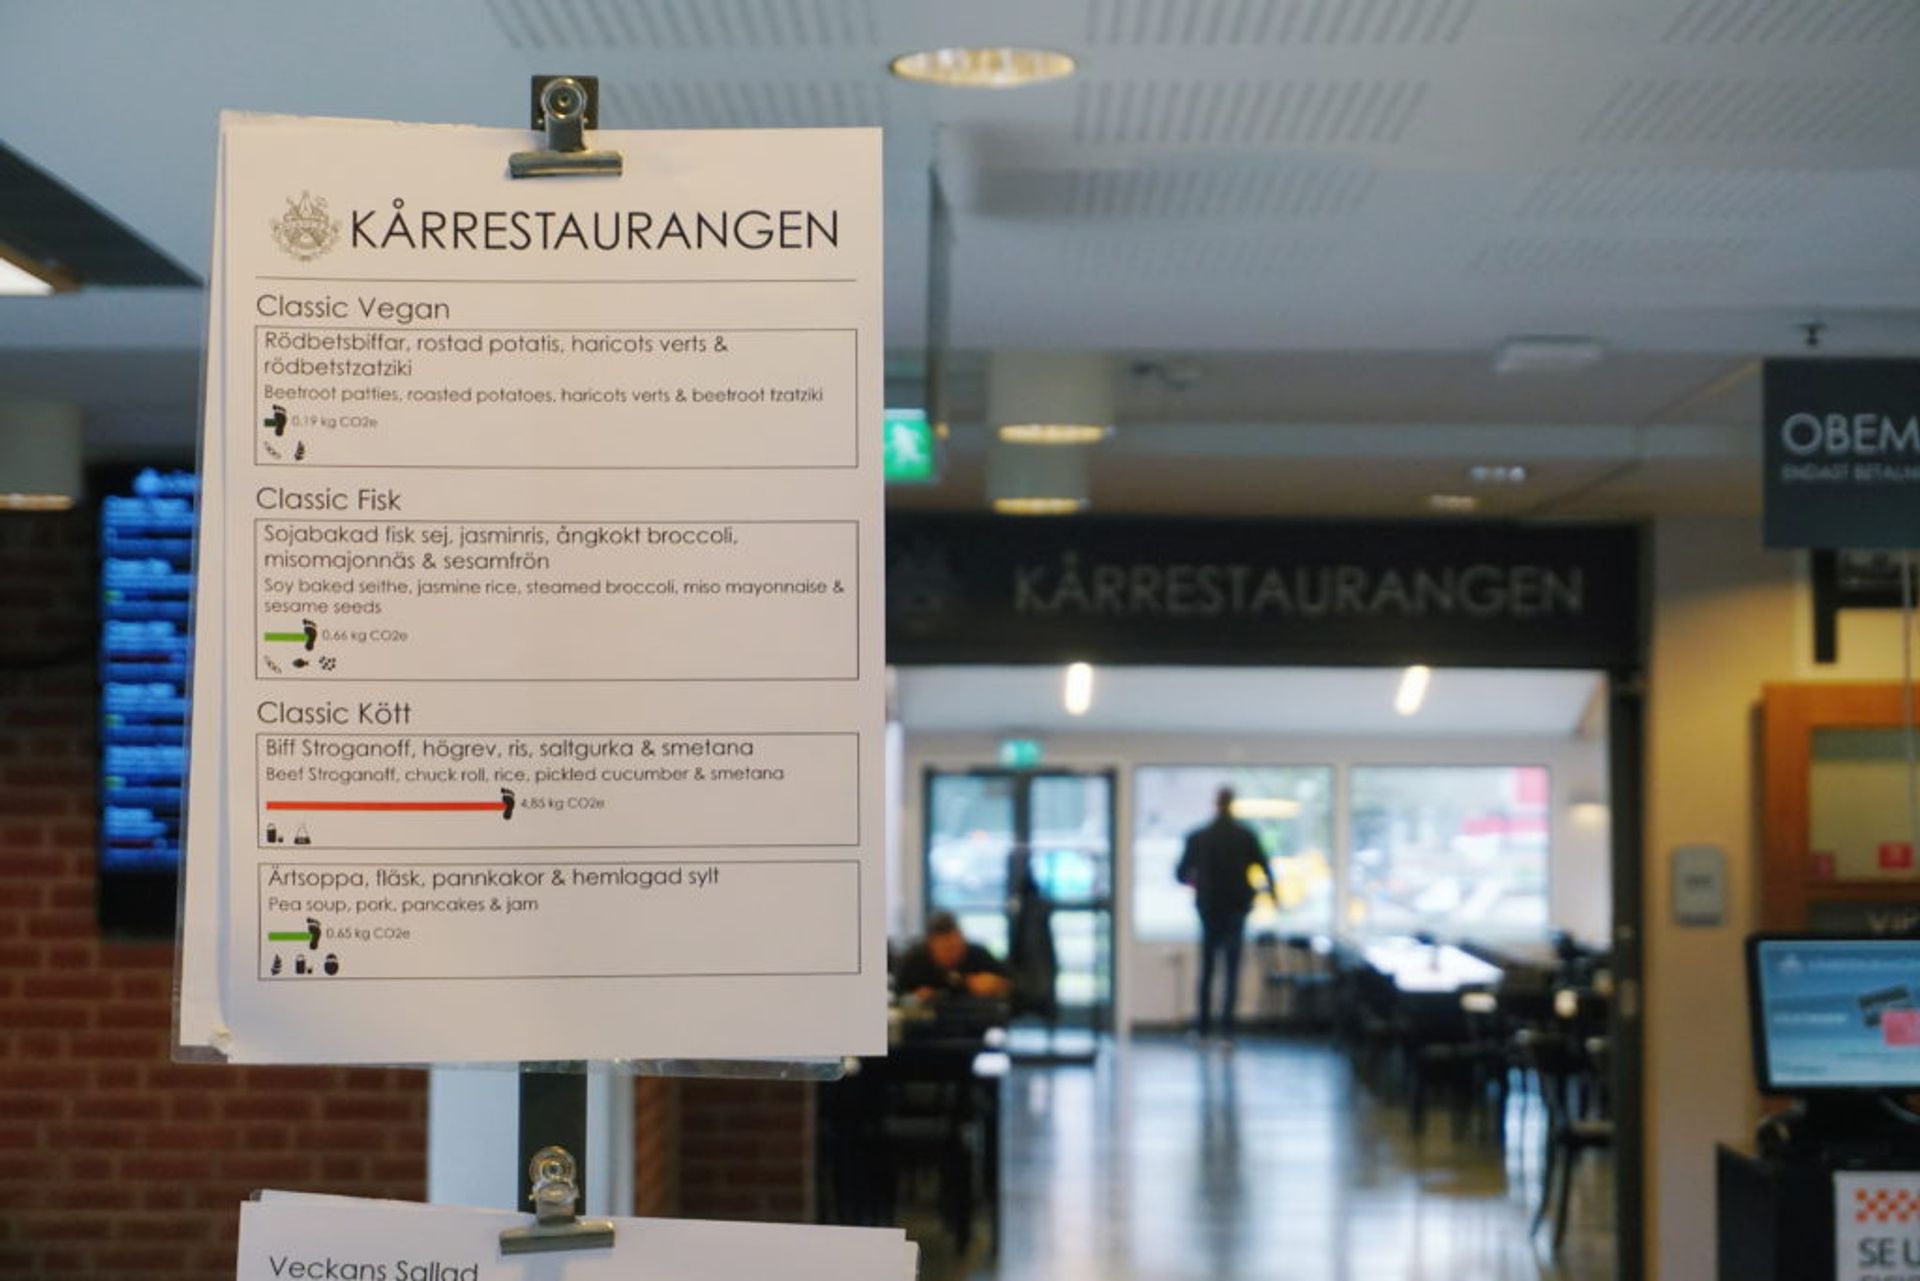 A menu with vegan, fish and meat option, from the restaurant "Kårrestaurangen", which is seen in the background.